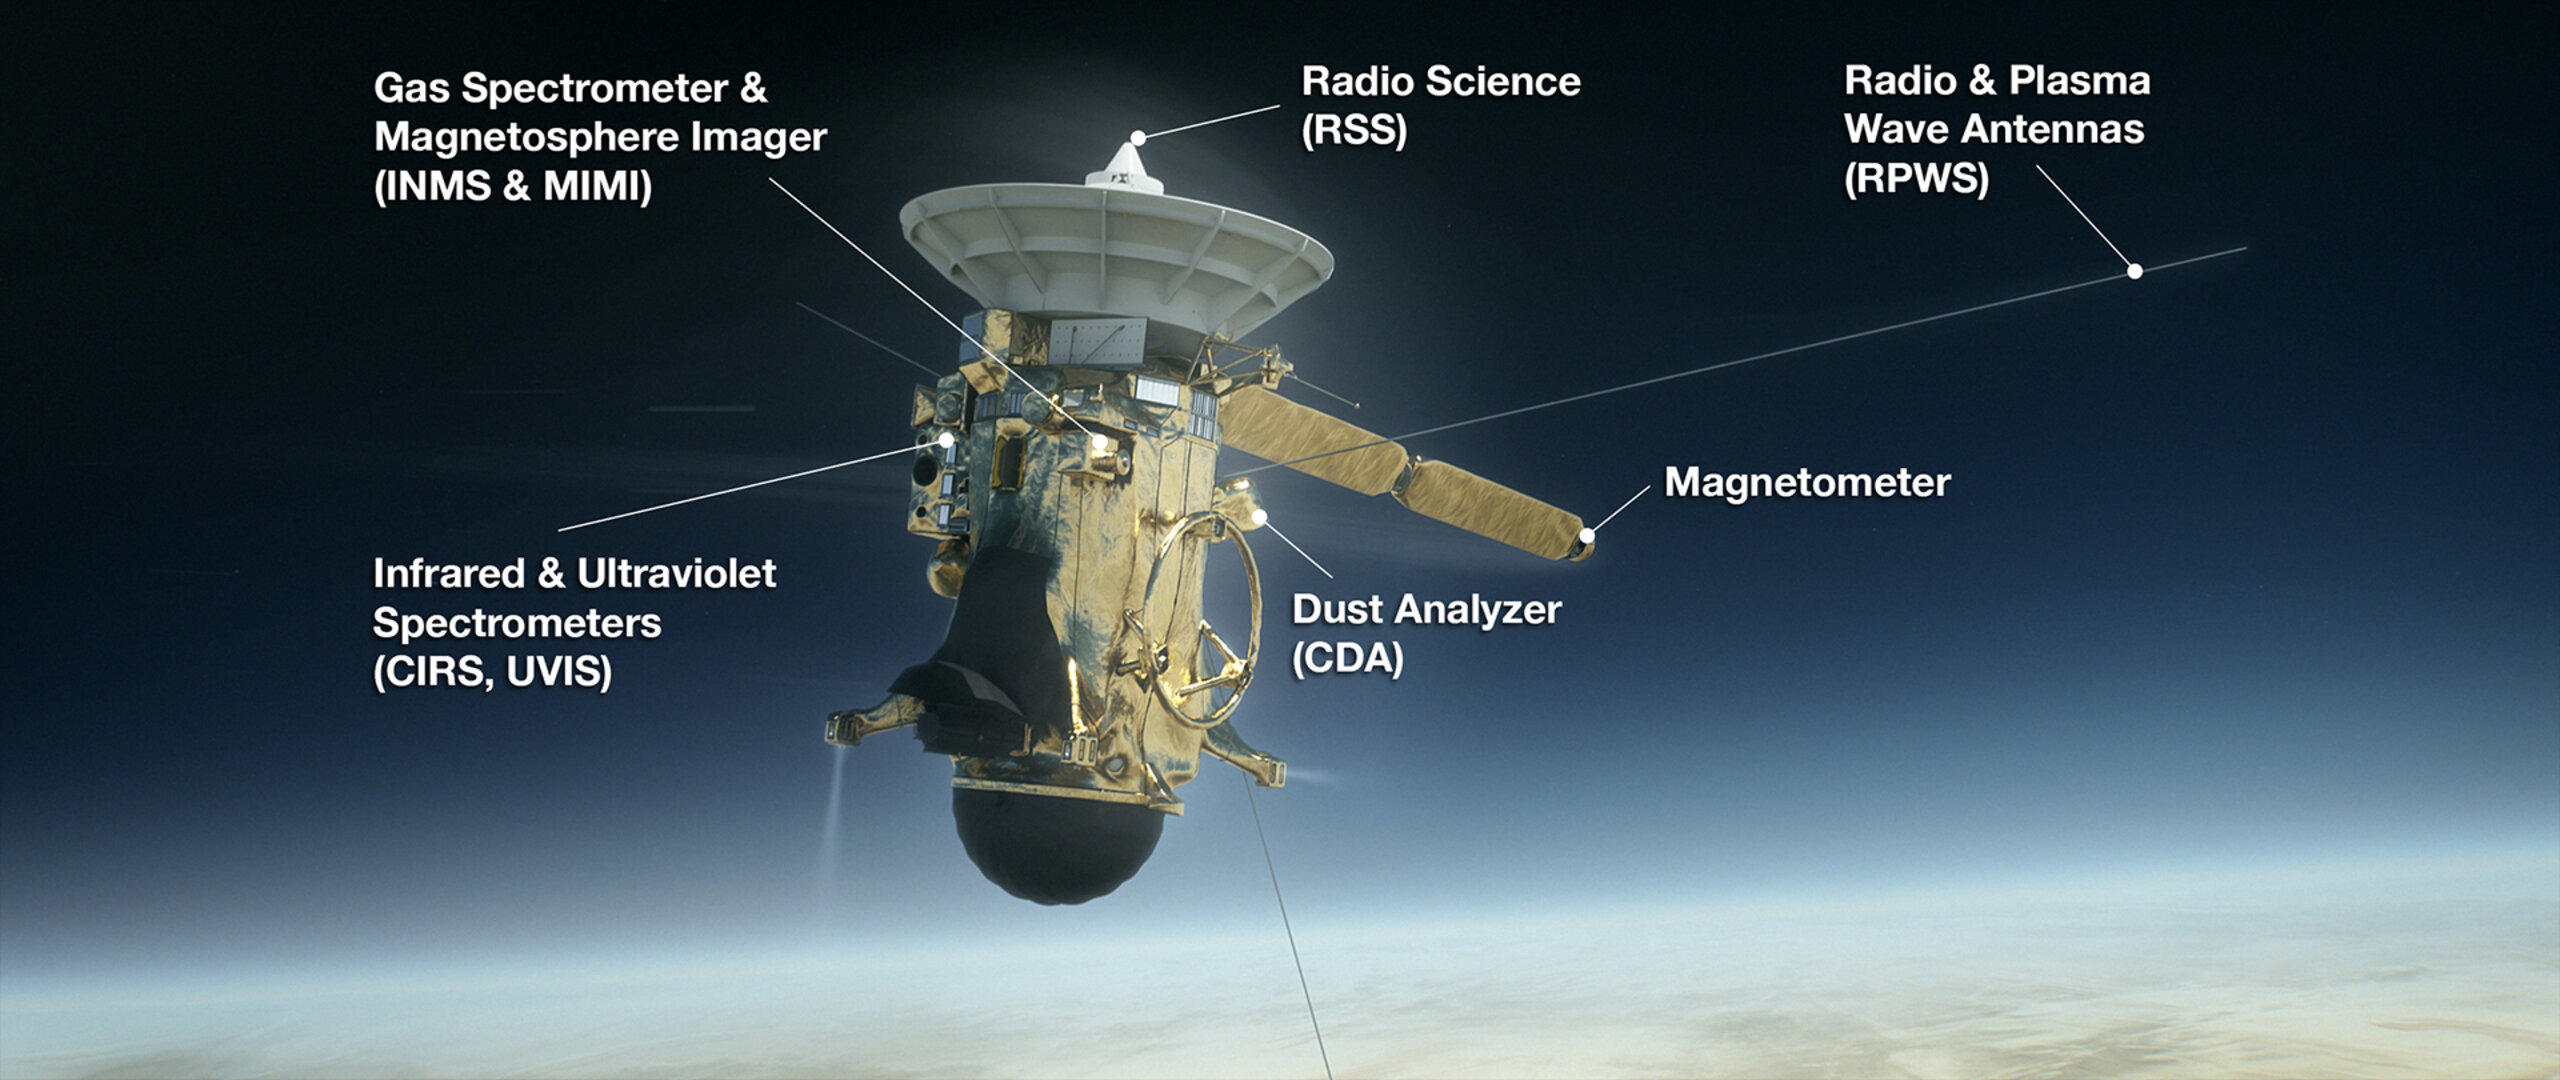 Eight of Cassini’s scientific instruments were used during its grand finale